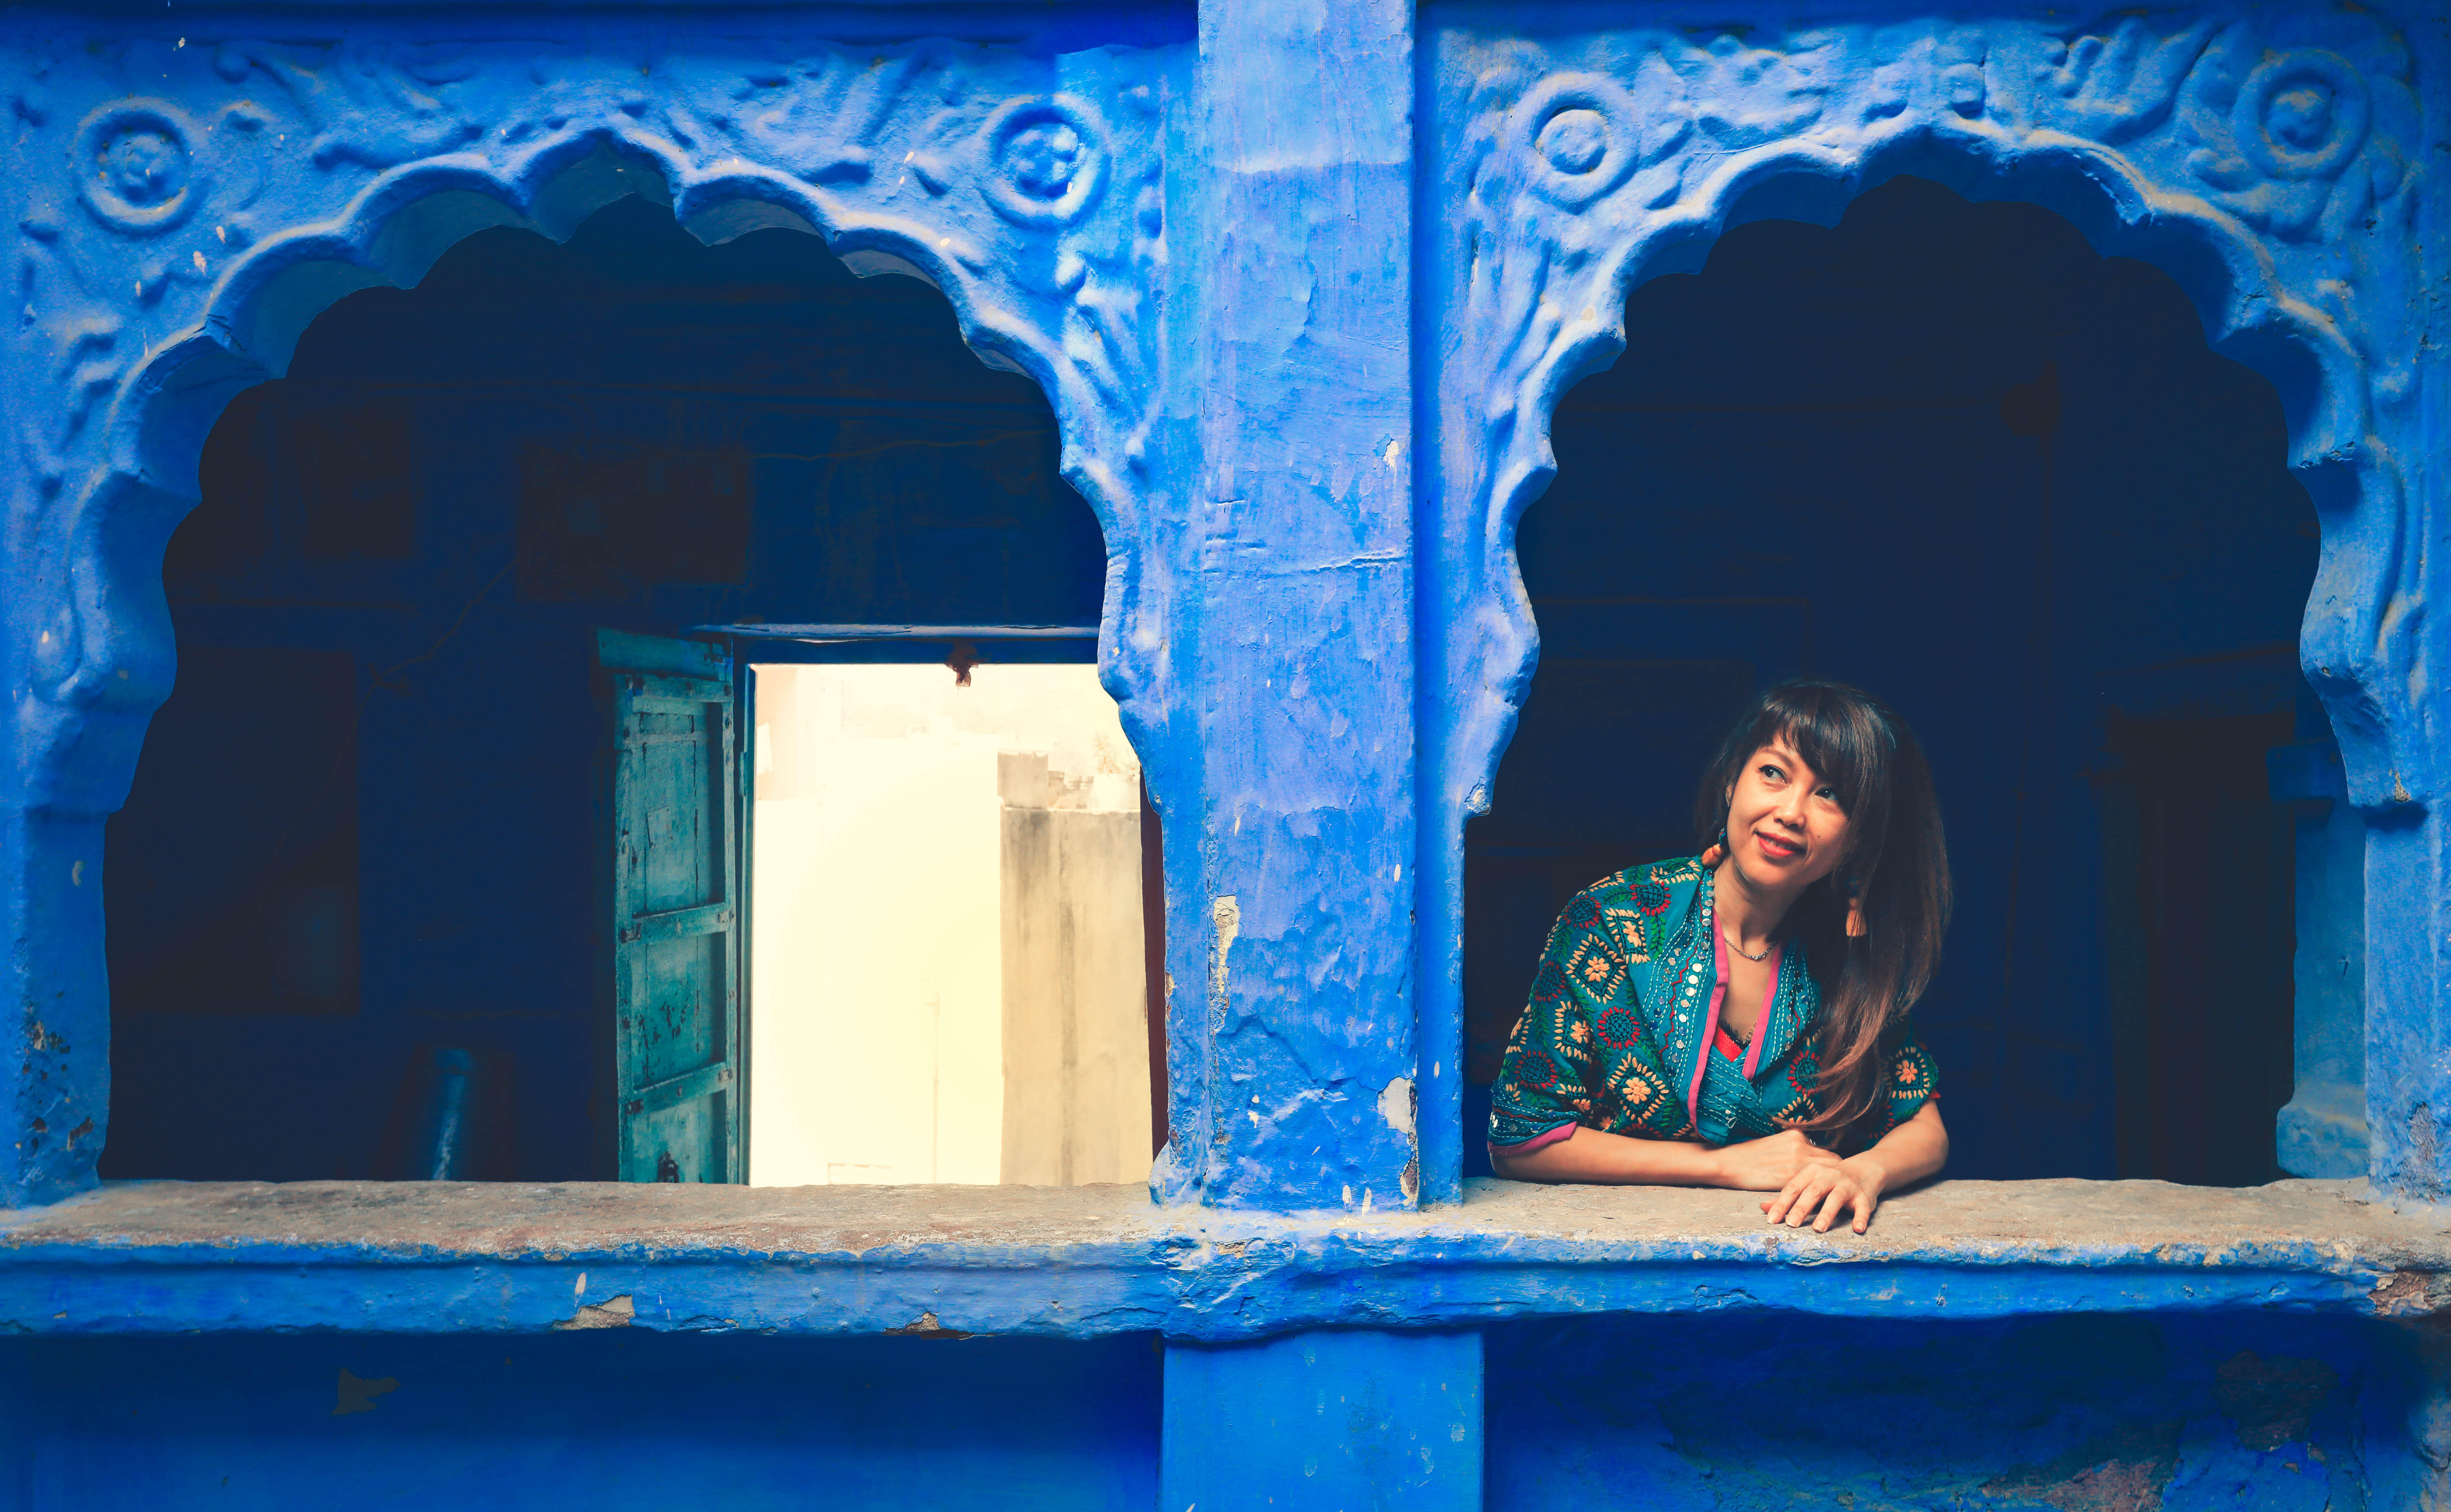 Jodhpur Tour Packages | UPTO 50% Off February Month Offer